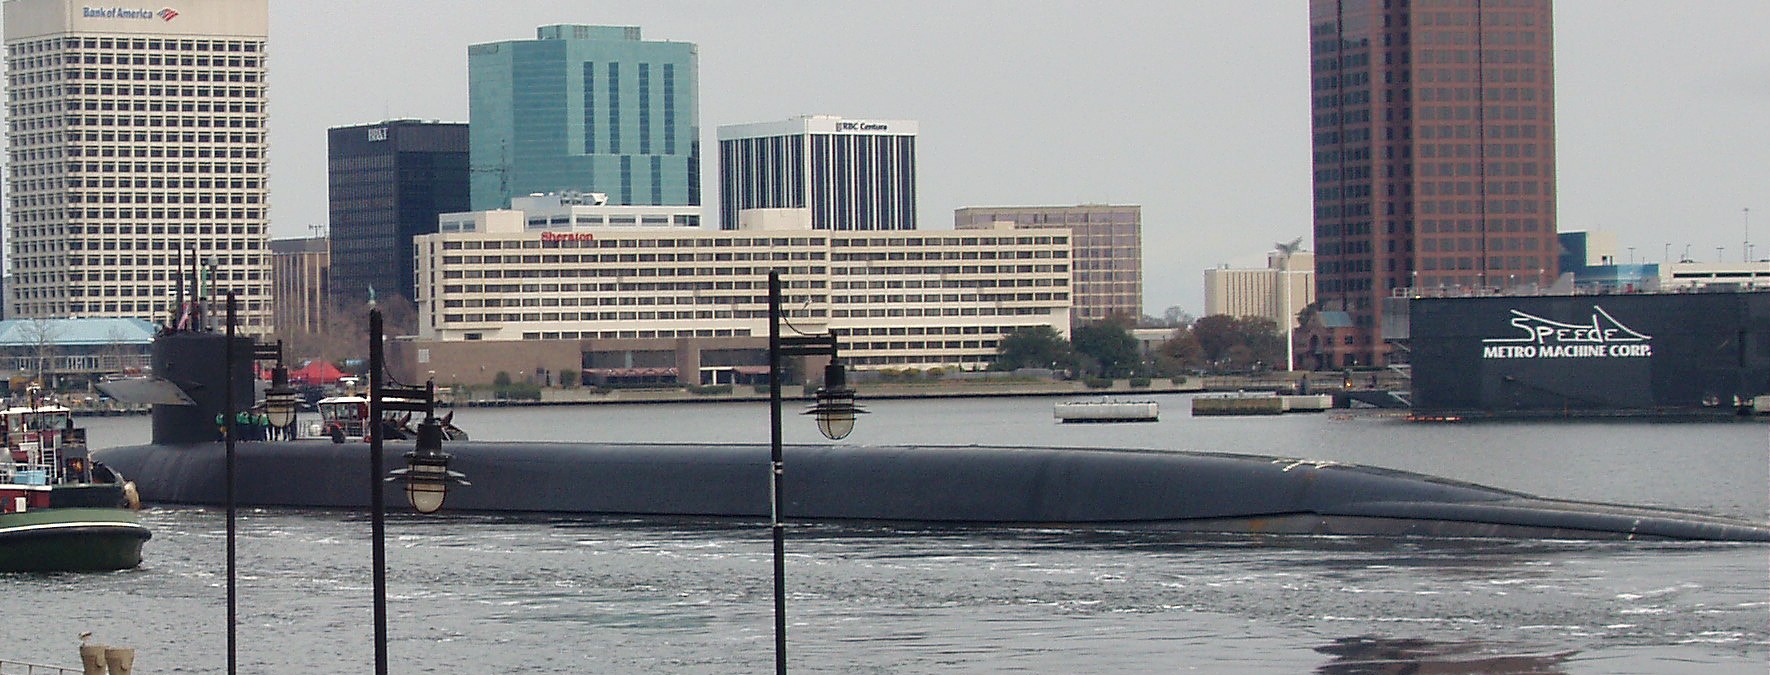 ssgn-728 uss florida guided missile submarine us navy 2006 51